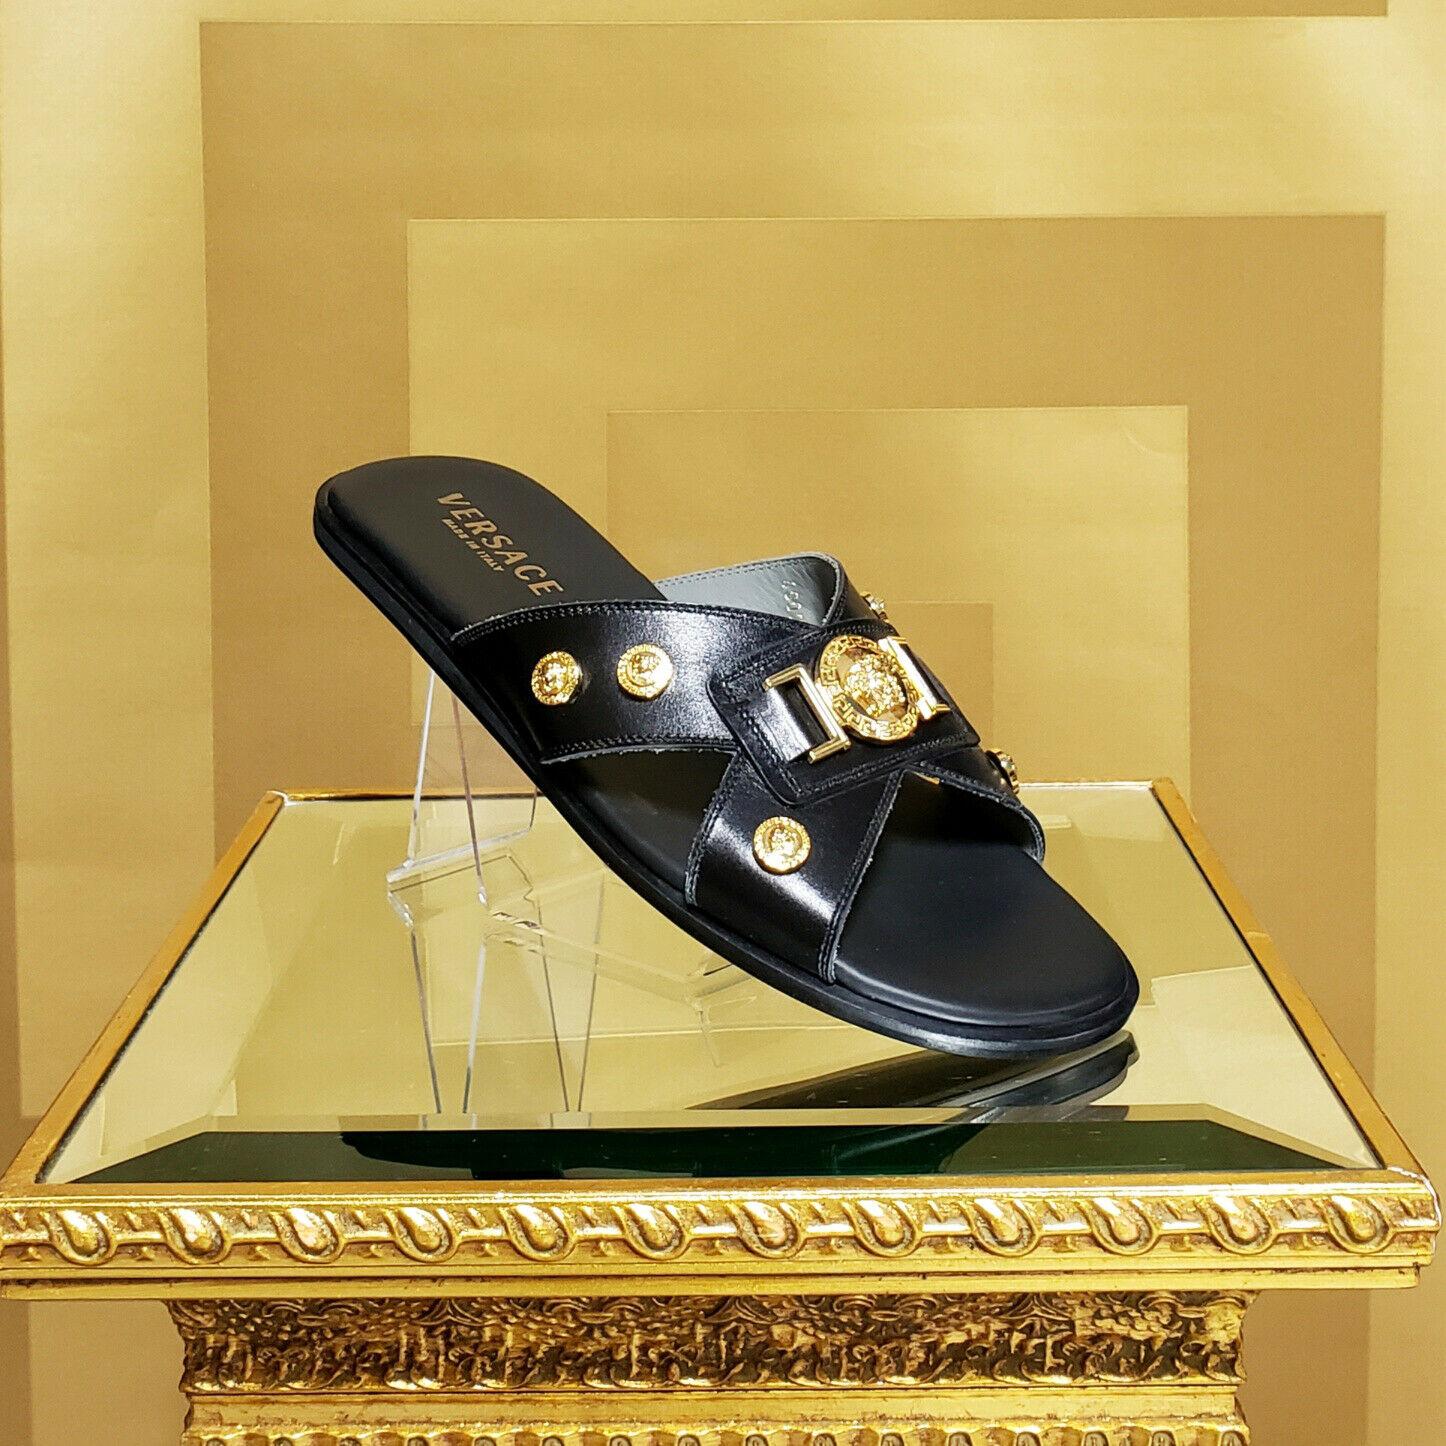 Black NEW VERSACE BLACK W/GOLD HARDWARE LEATHER SANDALS Shoes IT 42 - US 9